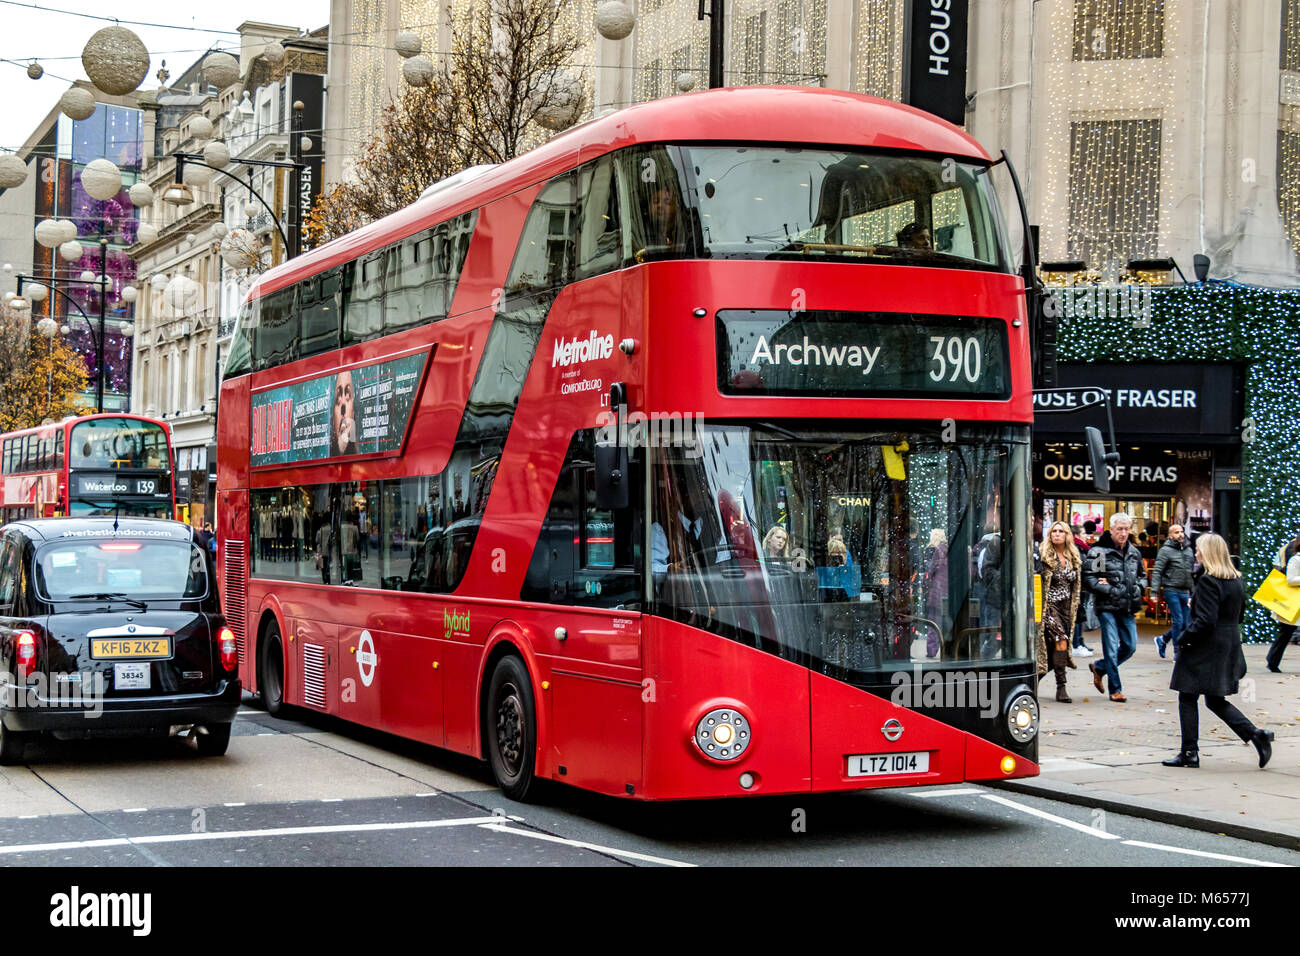 A no 390 bus on it's way to Archway on London's Oxford Street, London, UK Stock Photo